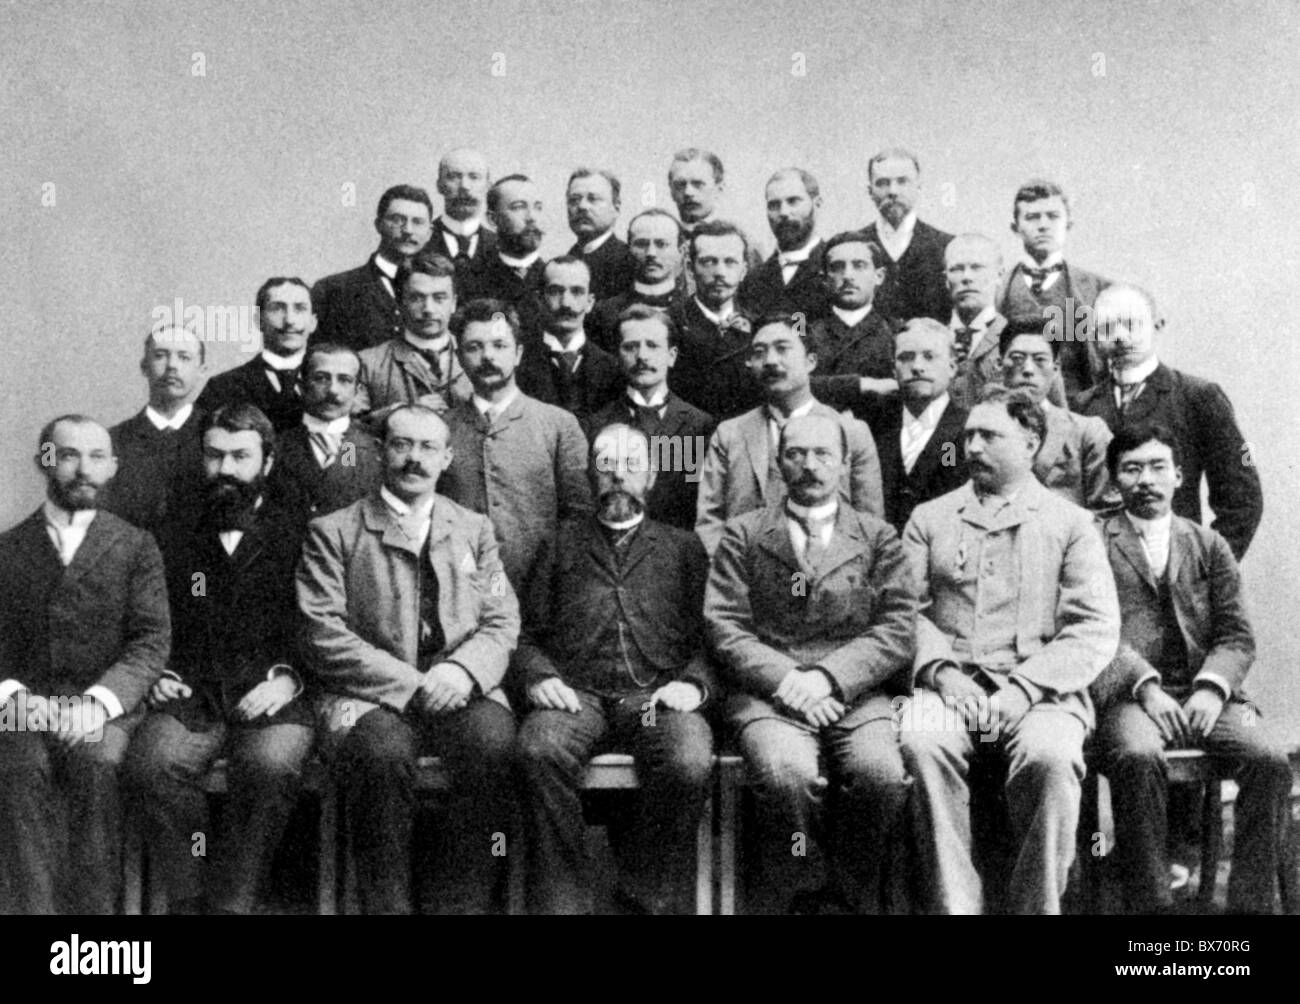 Koch, Robert, 11.12.1843 - 27. 5.1910, German physician, with participants of the bacteriological lecture for military physicians, Berlin, 1891, , Stock Photo